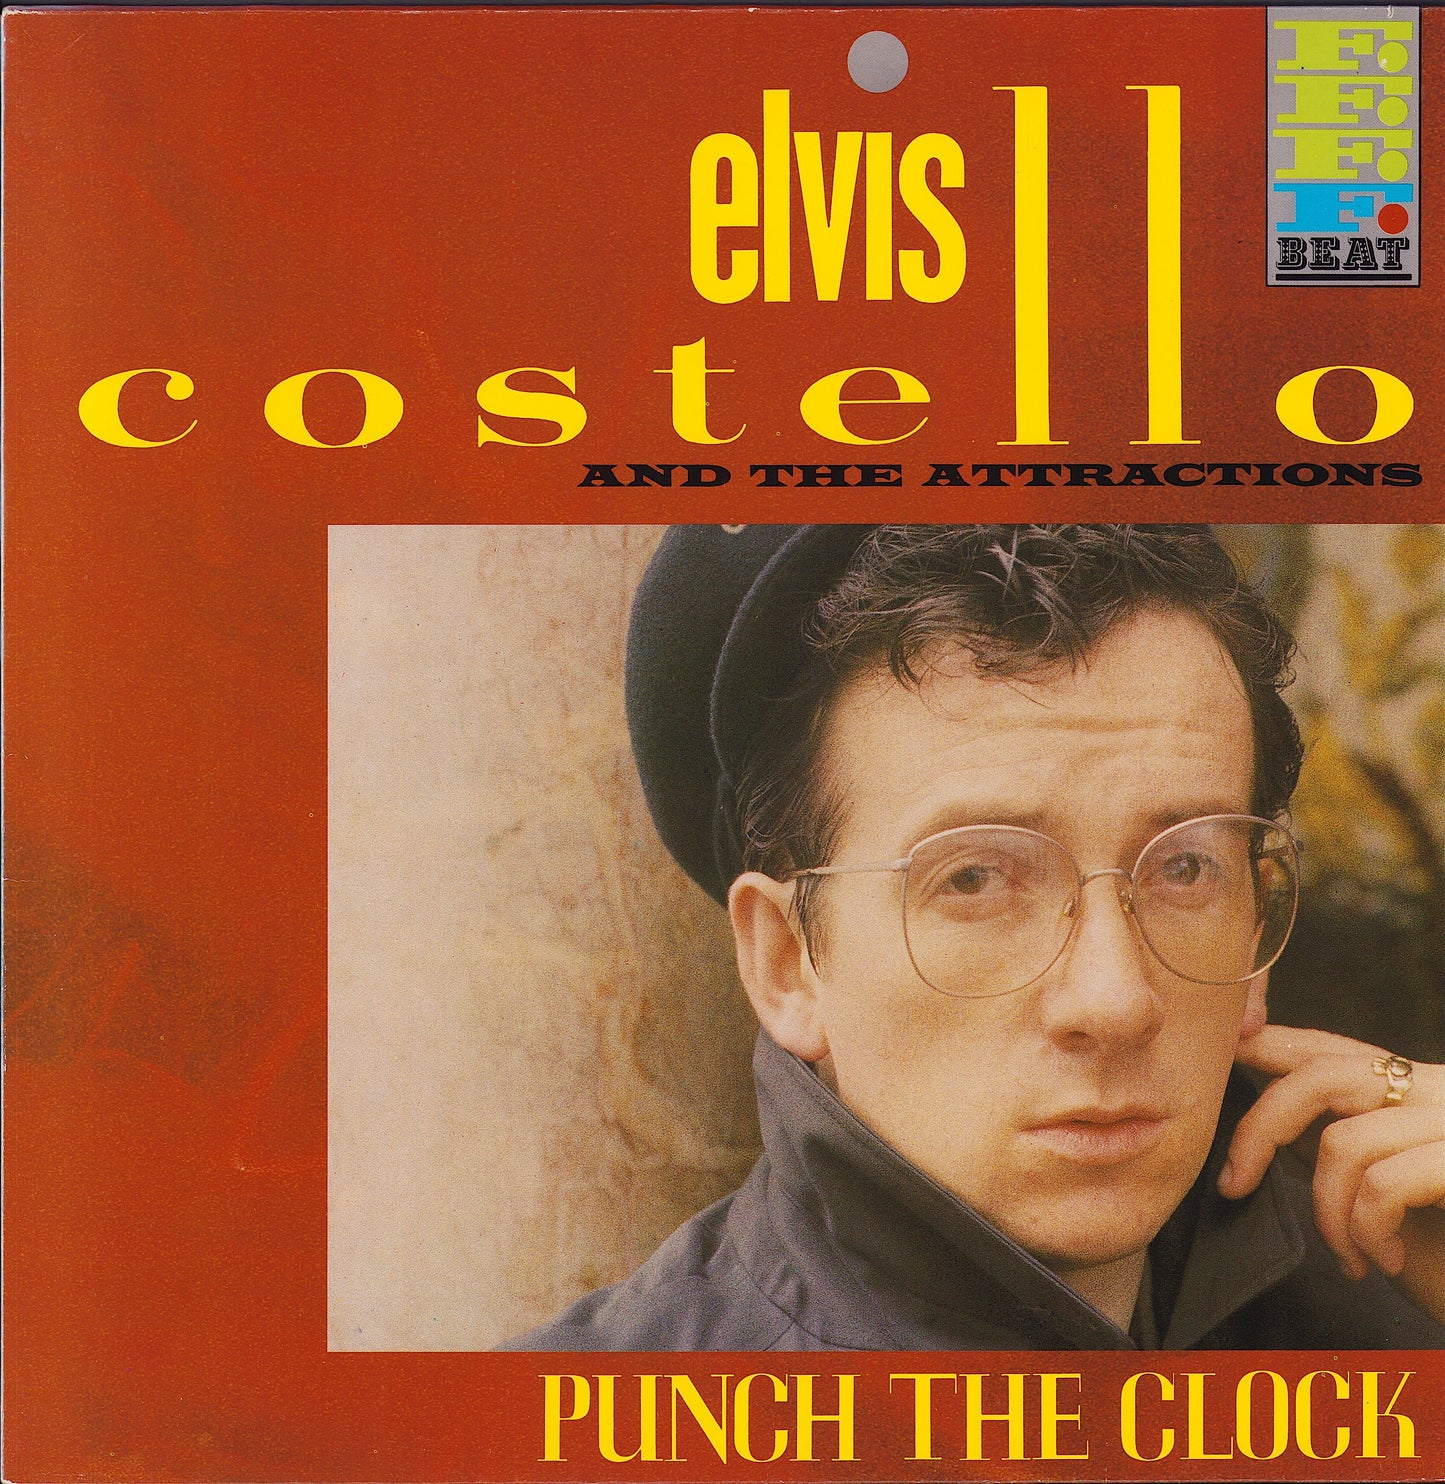 Elvis Costello And The Attractions - Punch The Clock (Vinyl LP)